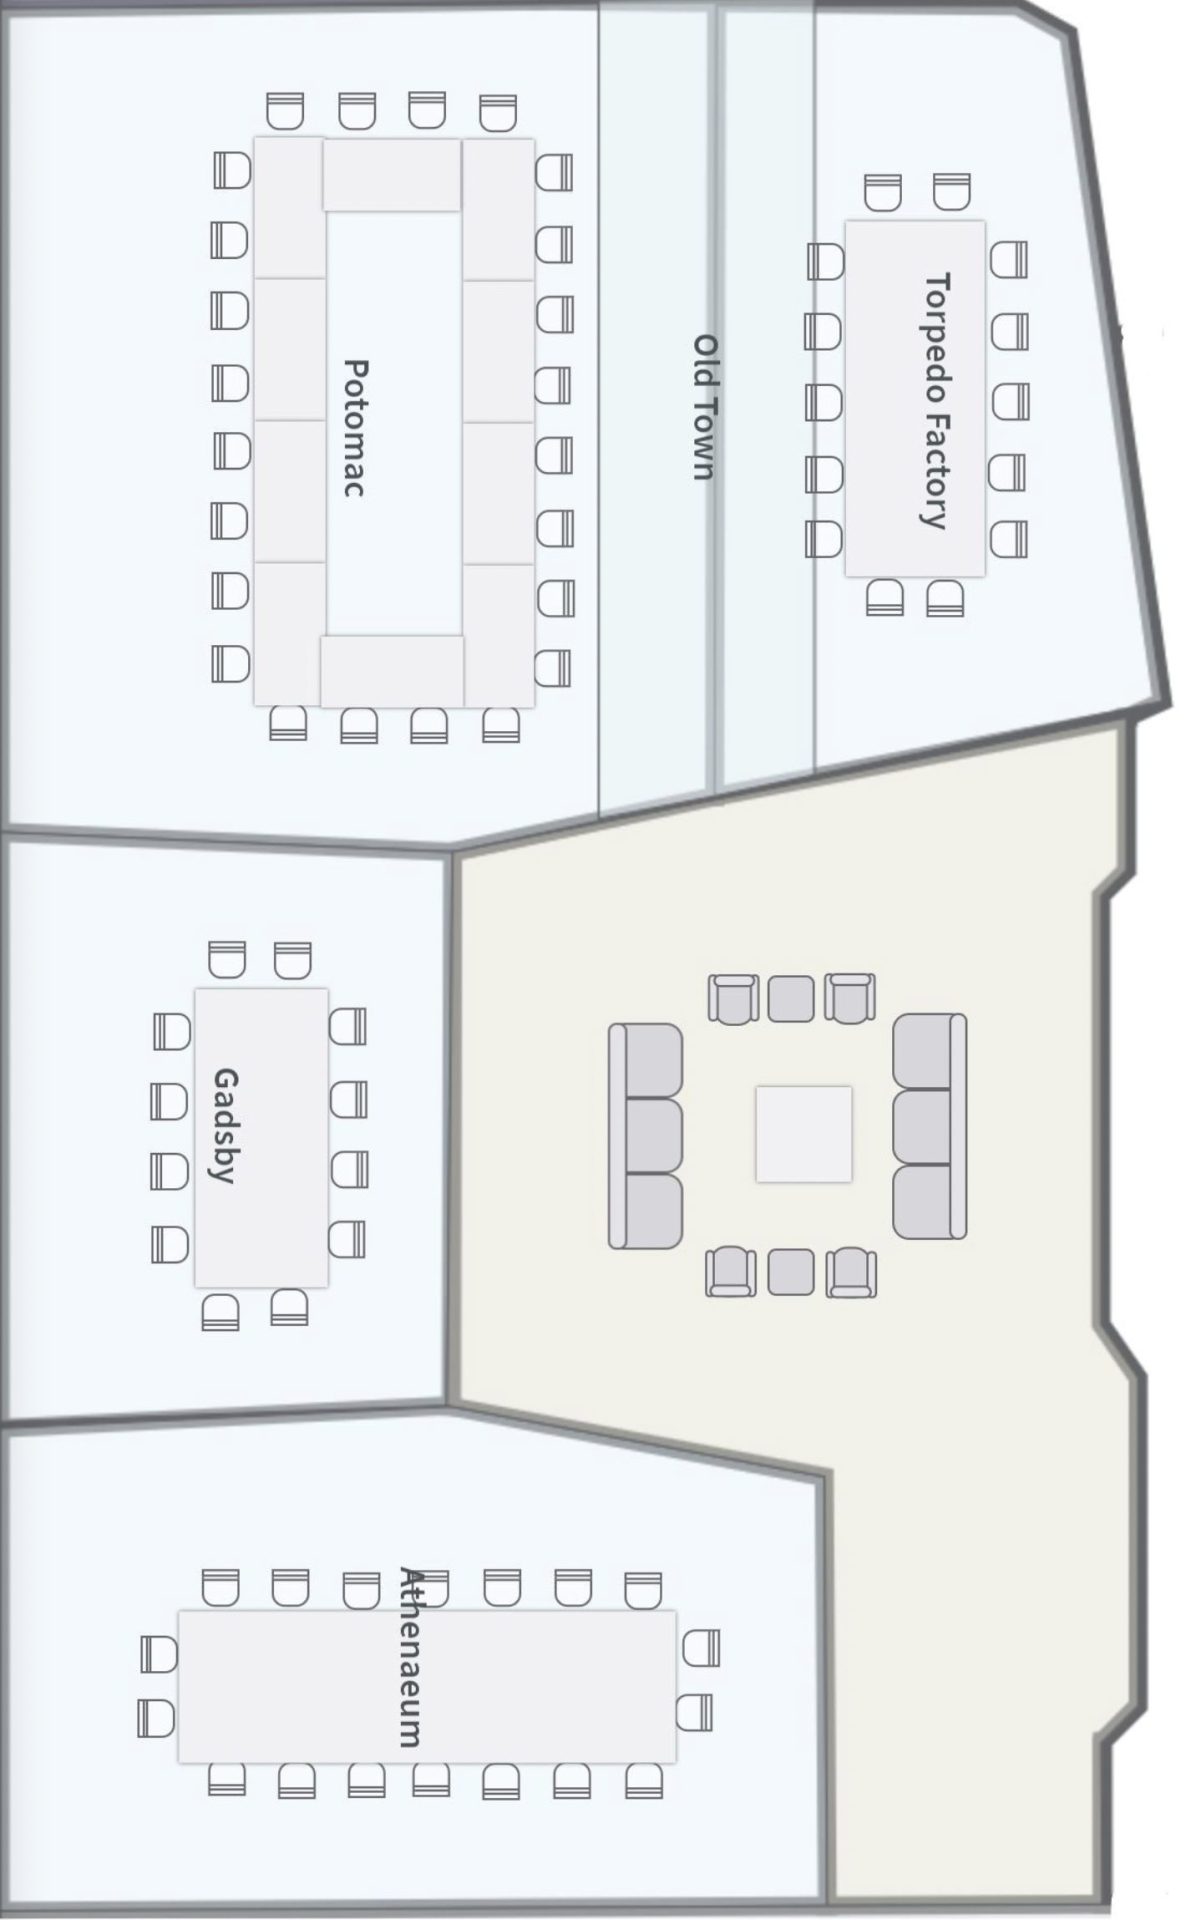 Waterfront Conference Center Floor Plan